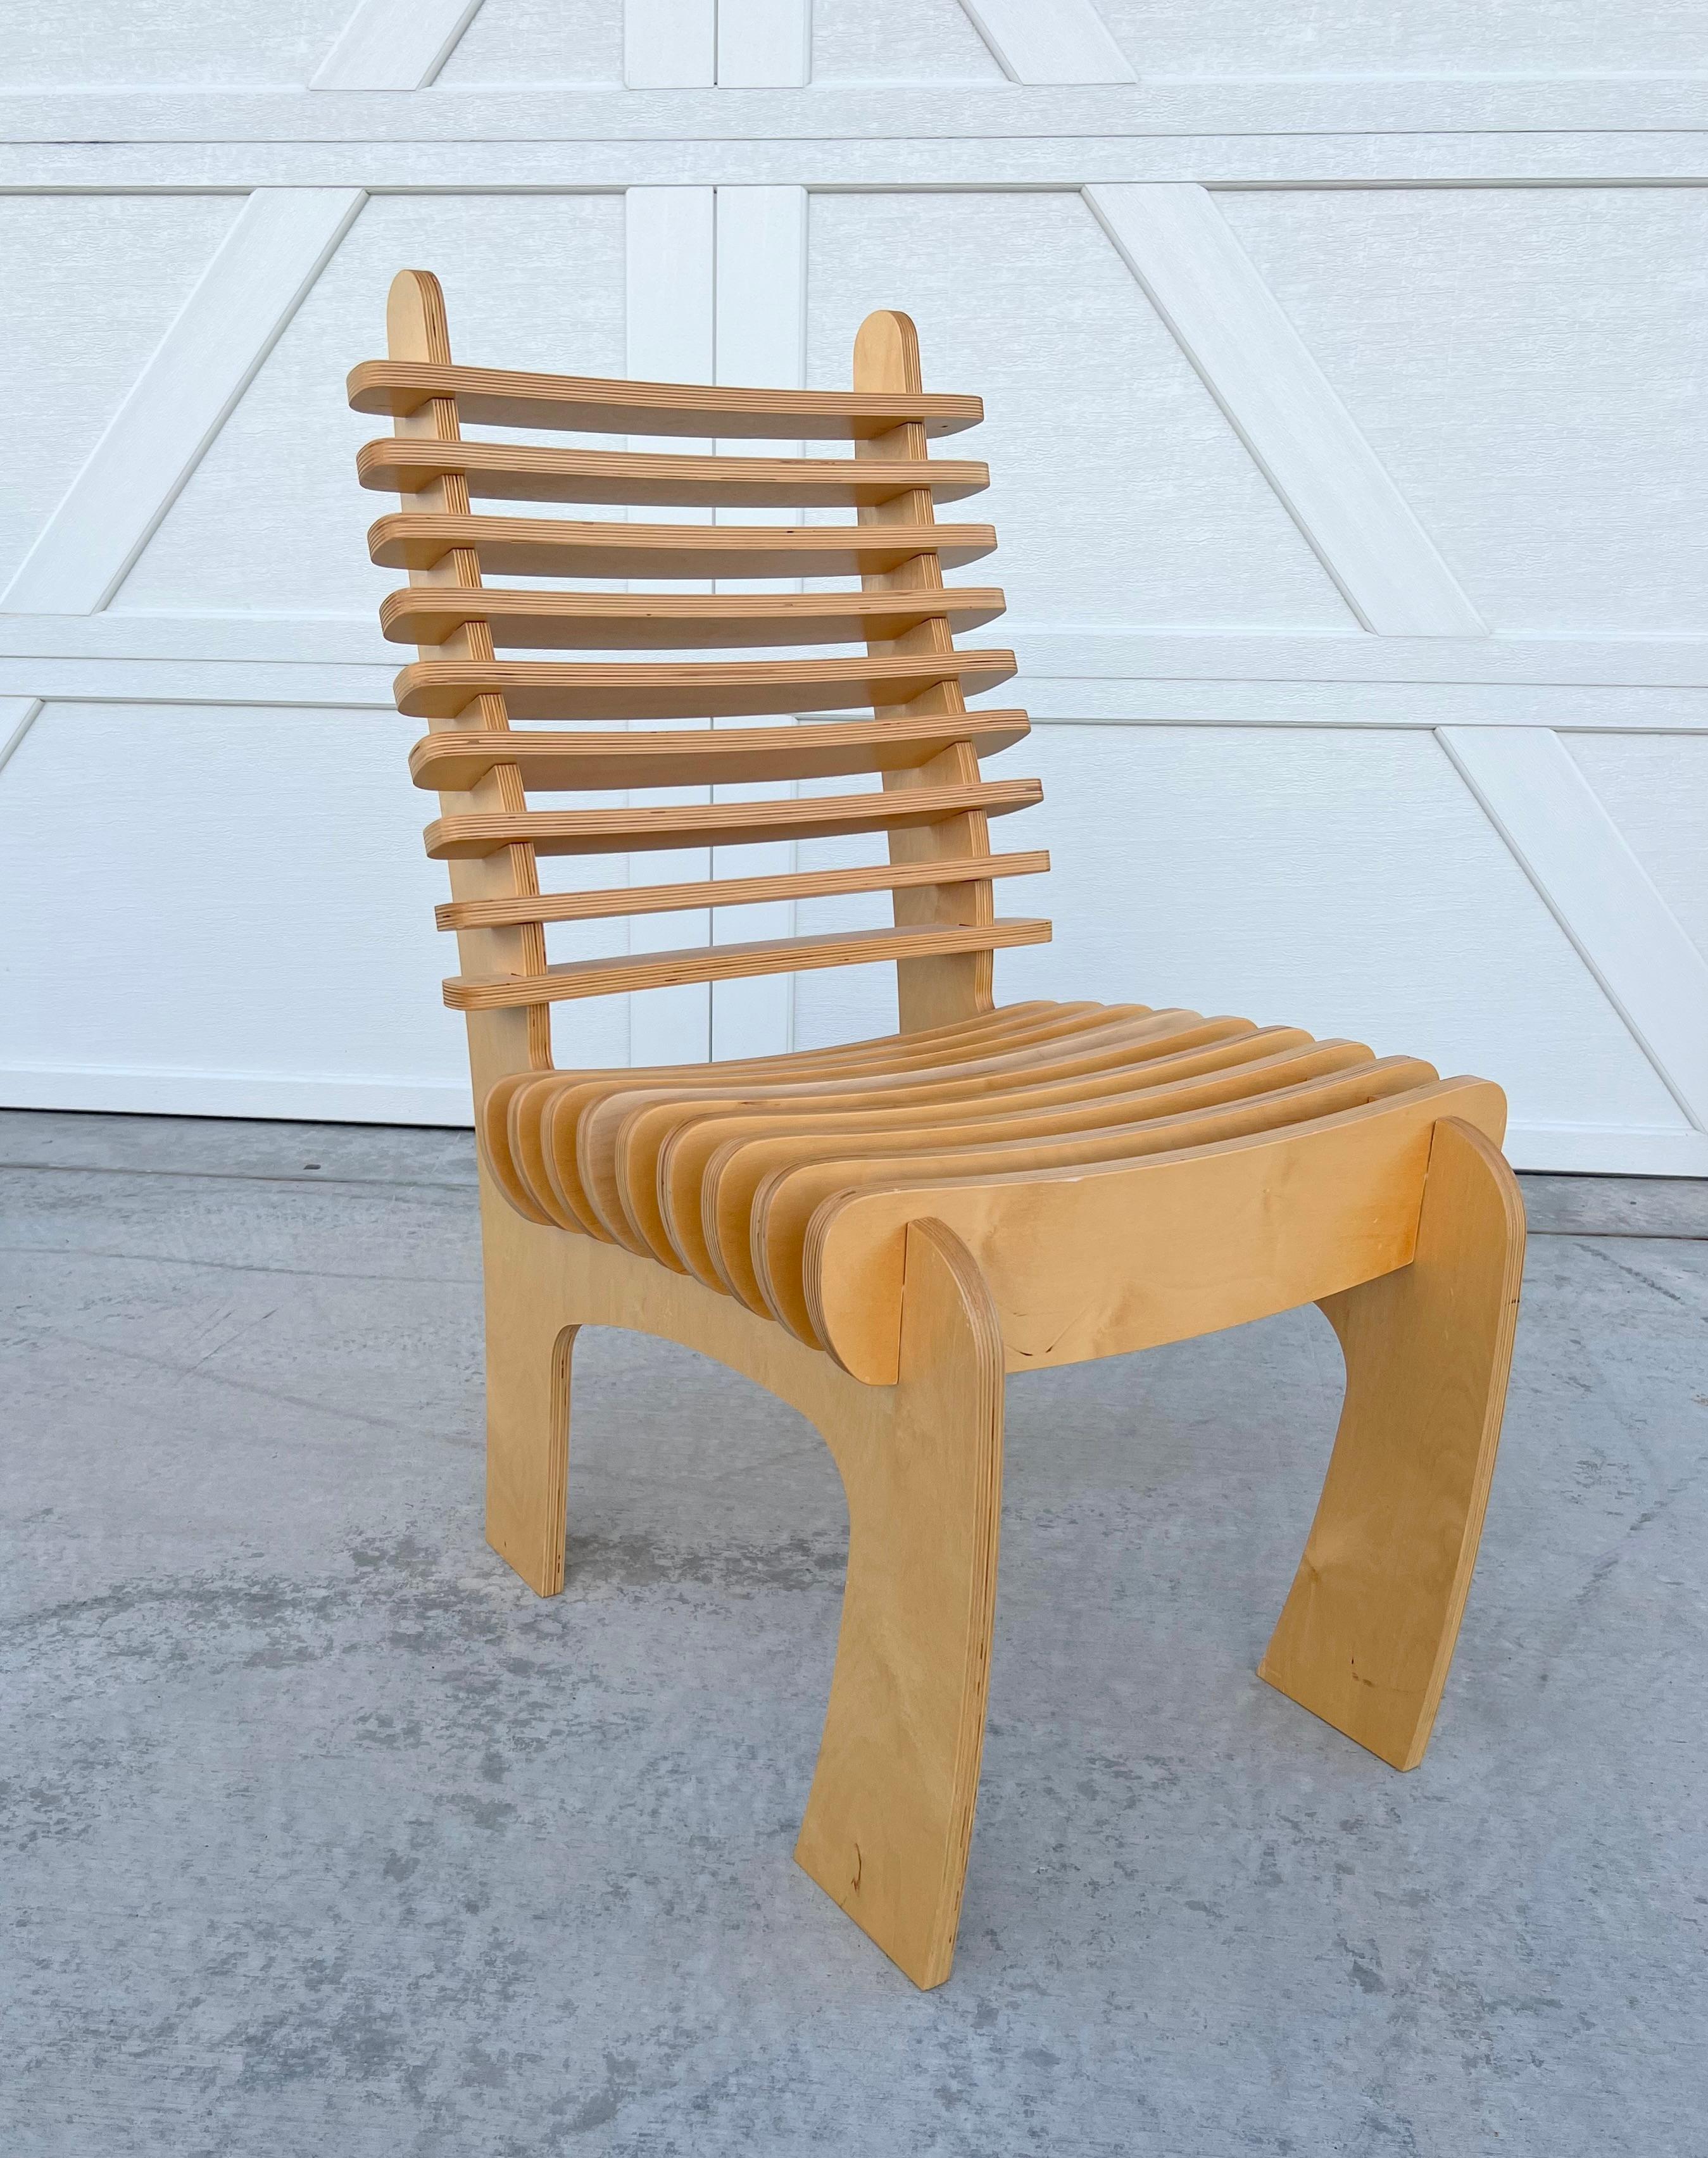 Hand-Crafted Modern Blond Plywood Minimalist Slat Side Chair Art Architectural Piece For Sale